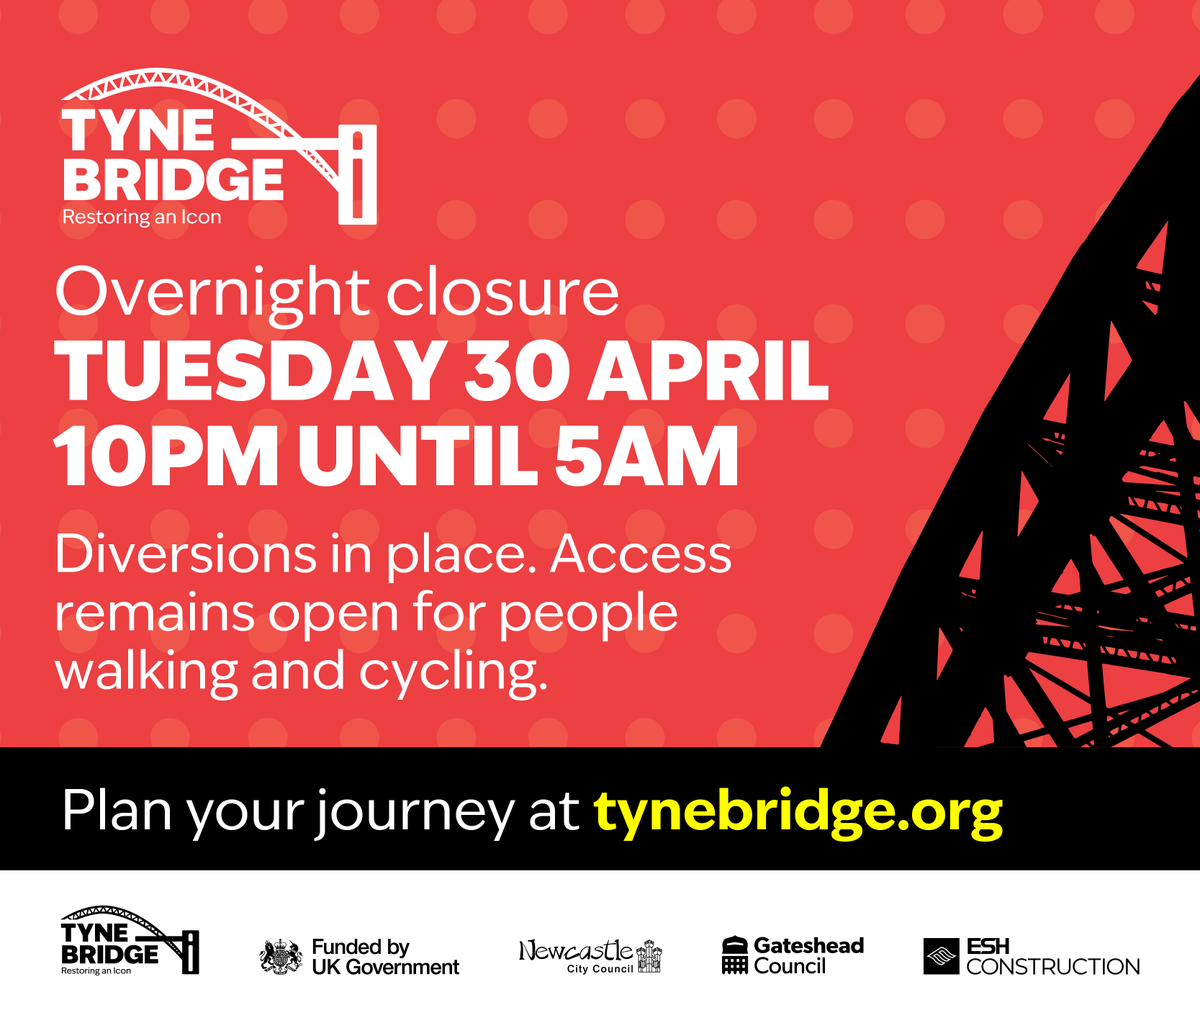 TYNE BRIDGE RESTORATION full overnight closure tomorrow with traffic diverted from 10pm (Tues 30th) until 5am (Wed 1st). Our teams will be working on the west side lighting columns. A safe route for people on foot and on bikes will remain open. Thanks for your patience.